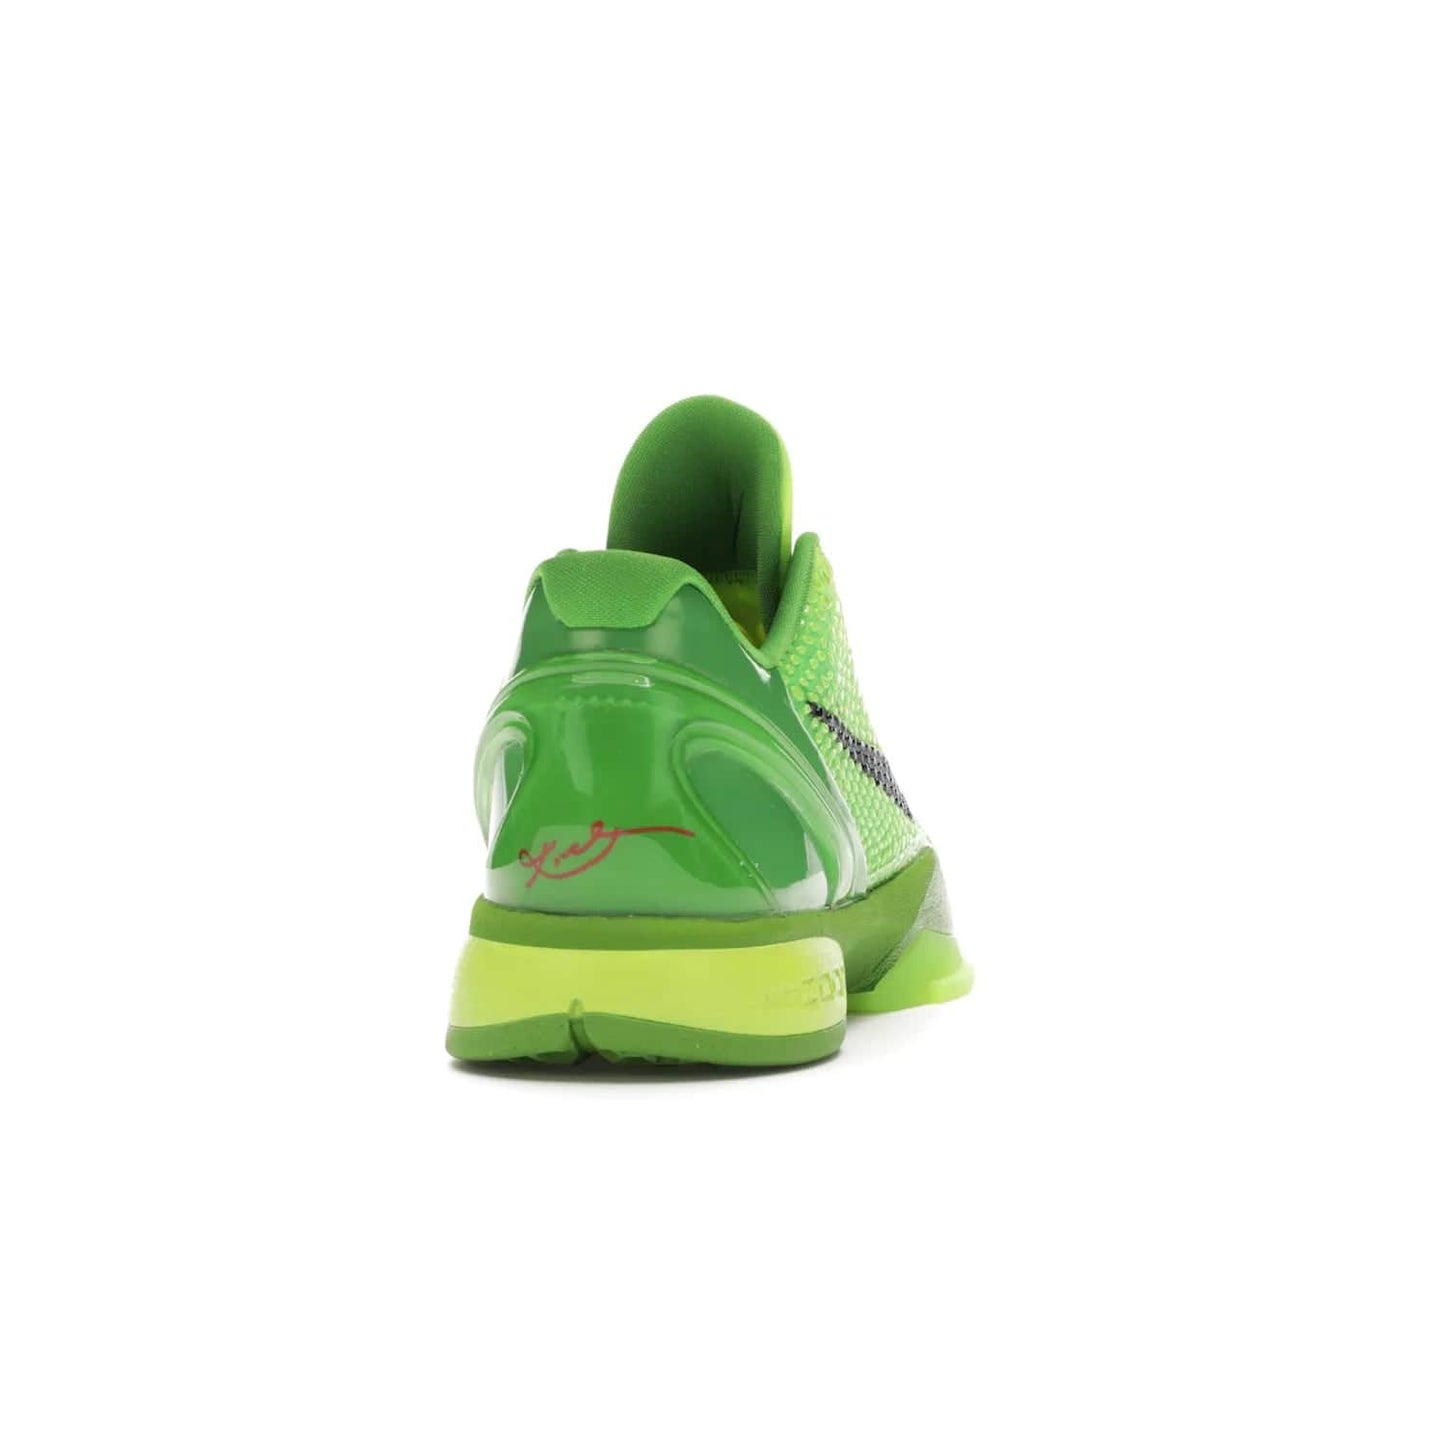 Nike Kobe 6 Protro Grinch (2020) - Image 29 - Only at www.BallersClubKickz.com - #
The Nike Kobe 6 Protro Grinch updates the iconic 2011 design with modern tech like a Zoom Air cushioning system, scaled-down traction, and updated silhouette. Experience the textured Green Apple and Volt upper plus bright red and green accents for $180.